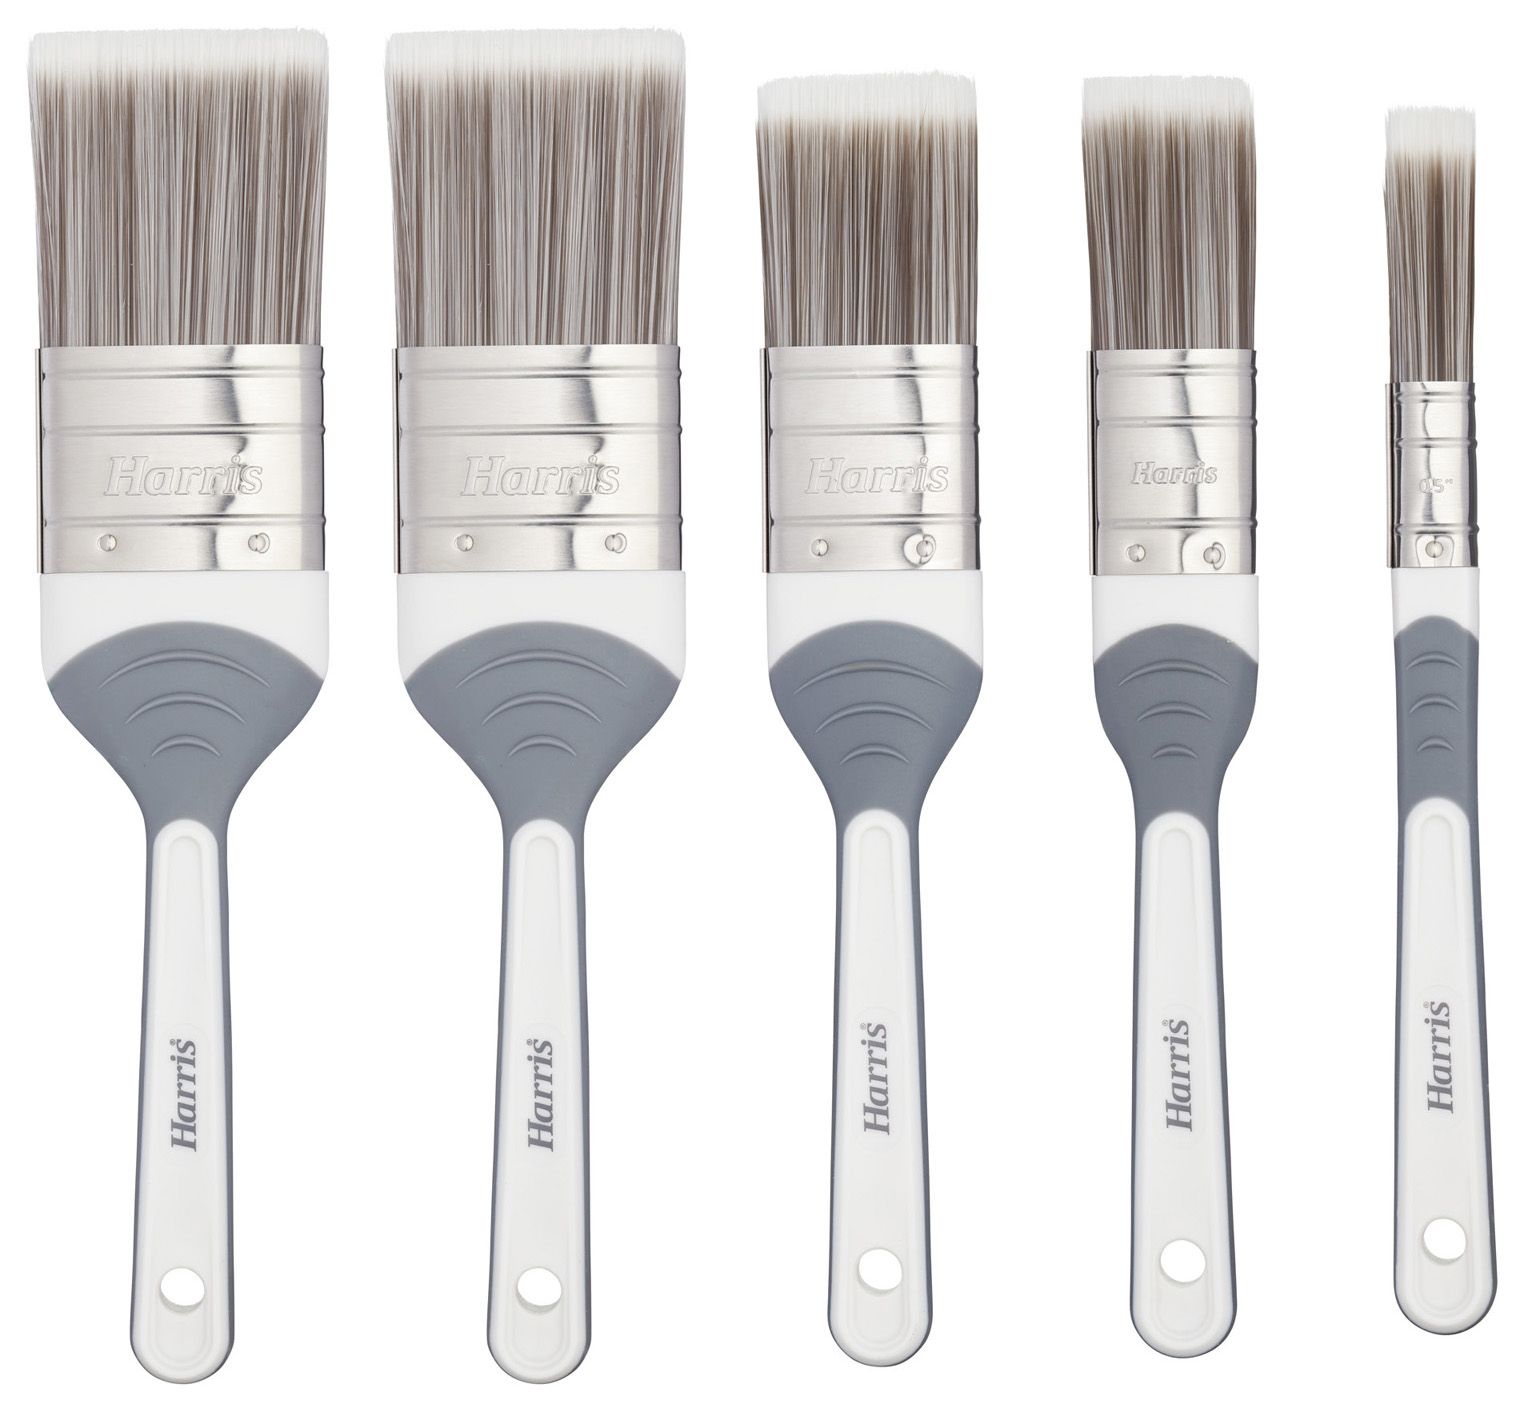 Image of Harris Seriously Good Walls & Ceilings Paint Brush Set - Pack of 5